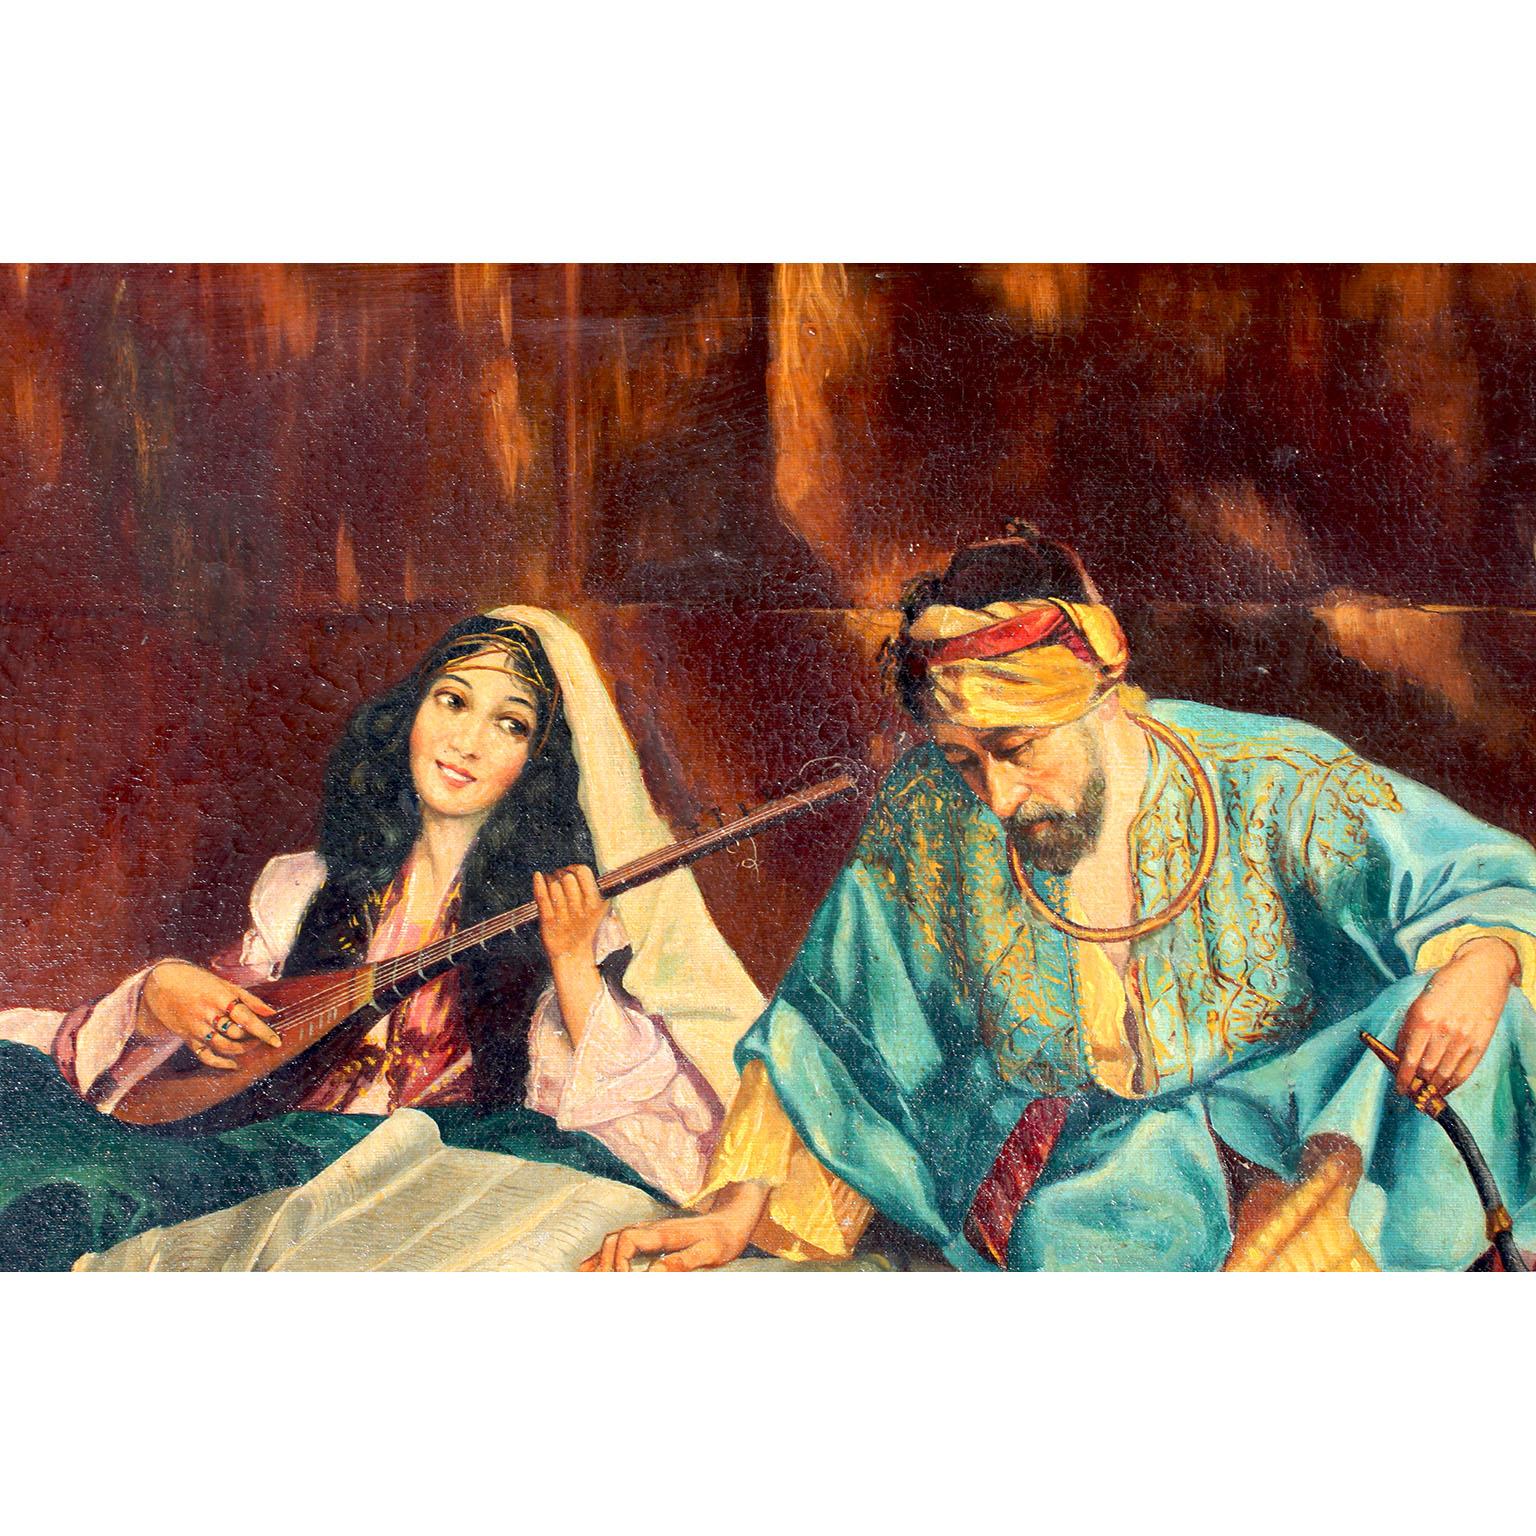 Islamic Early 20th Century Orientalist Oil on Canvas Titled 'The Master's Favorite' For Sale